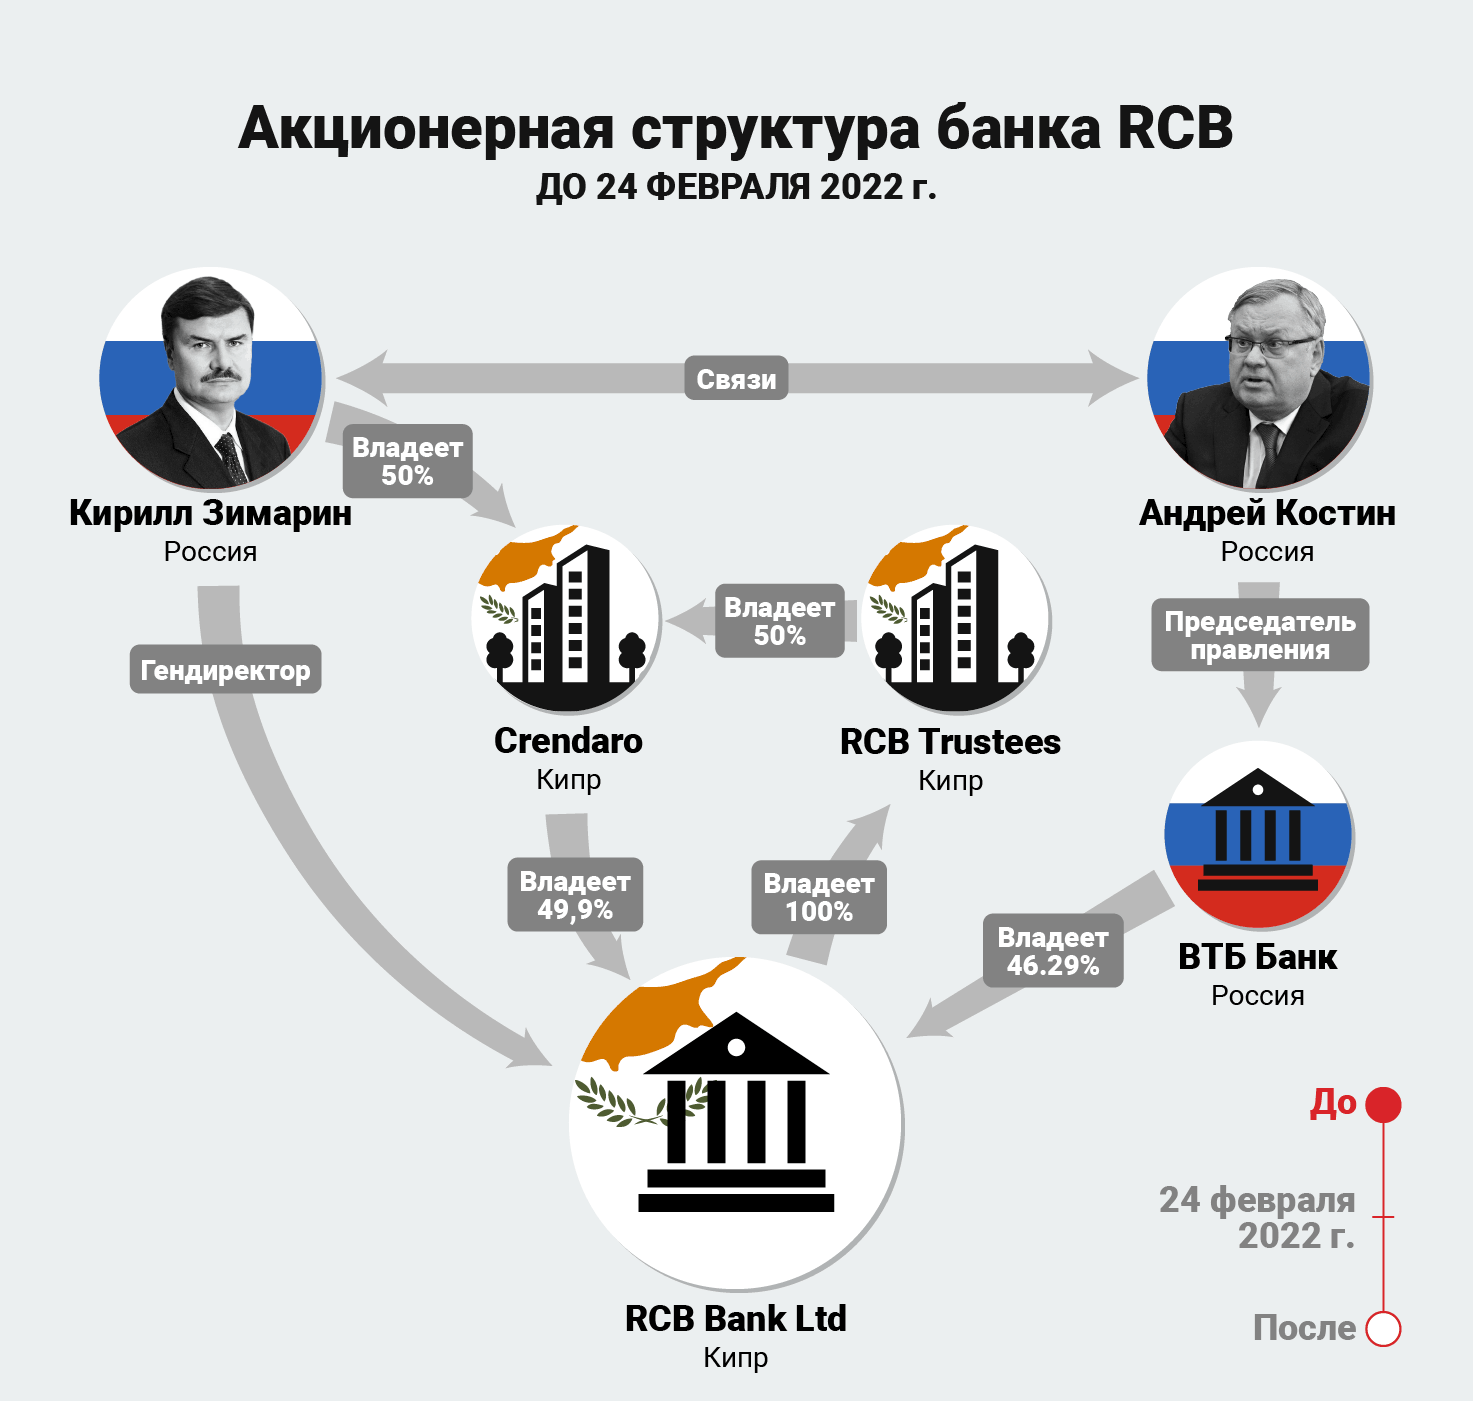 investigations/RCB-Shareholder-Structure-RUS.gif